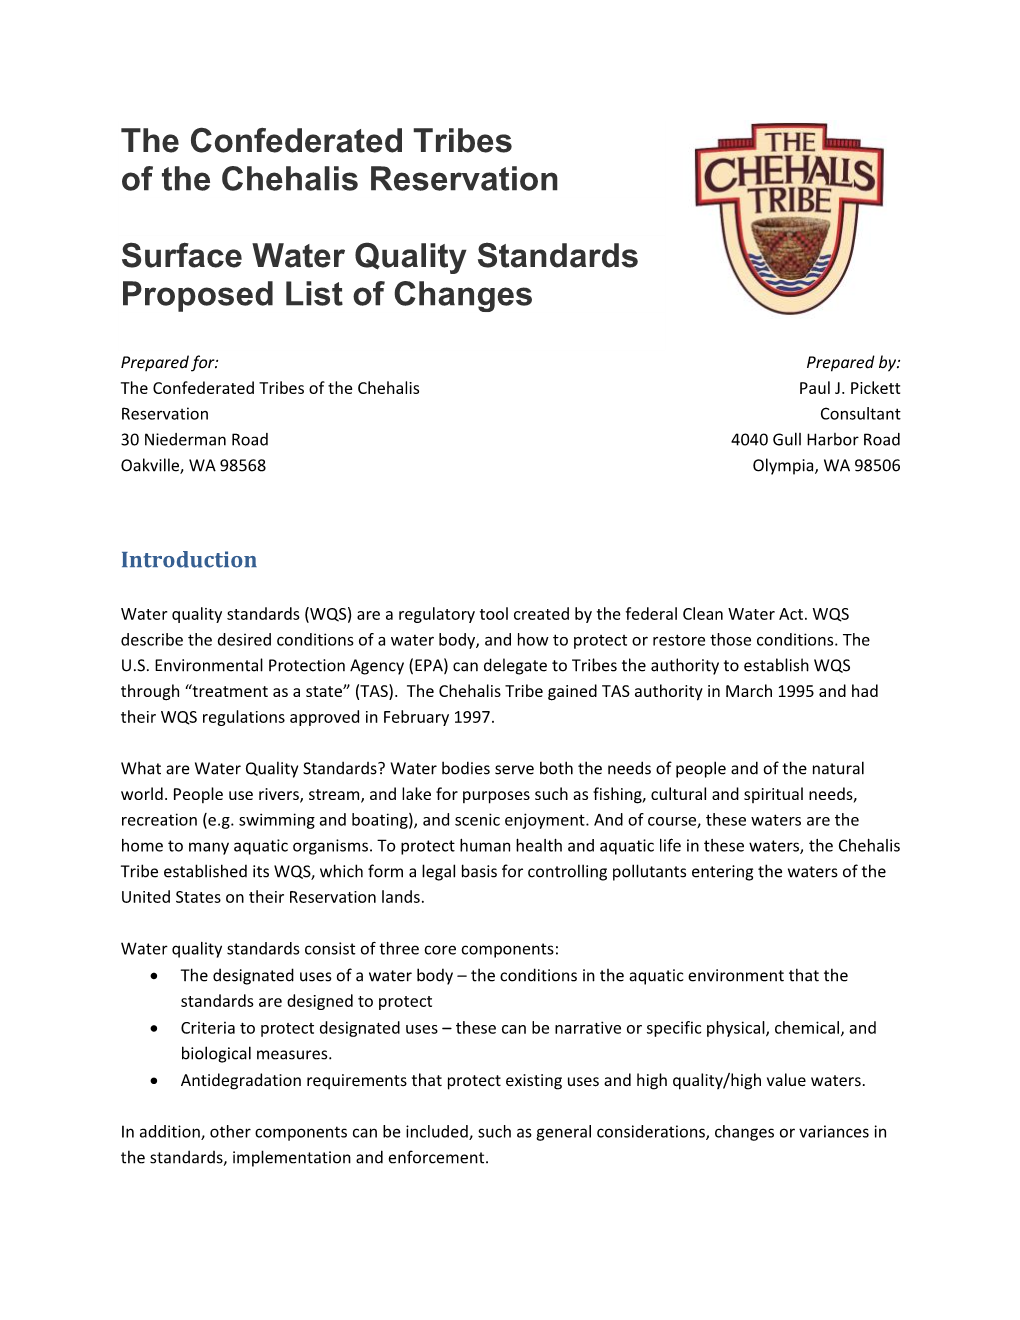 The Confederated Tribes of the Chehalis Reservation Surface